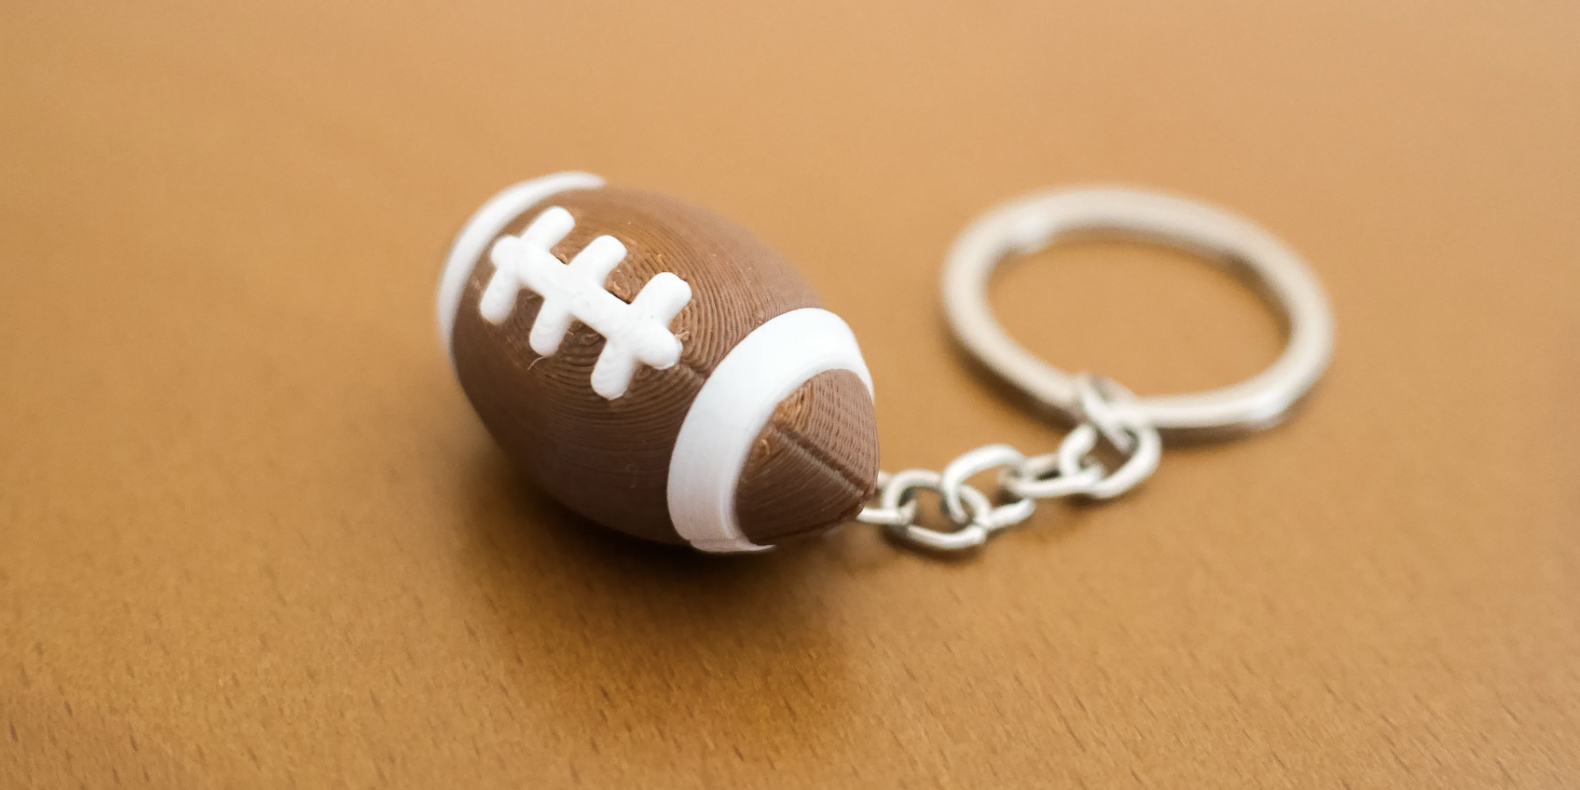 Find here a selection of the best 3D models from the NFL football and superbowl universe